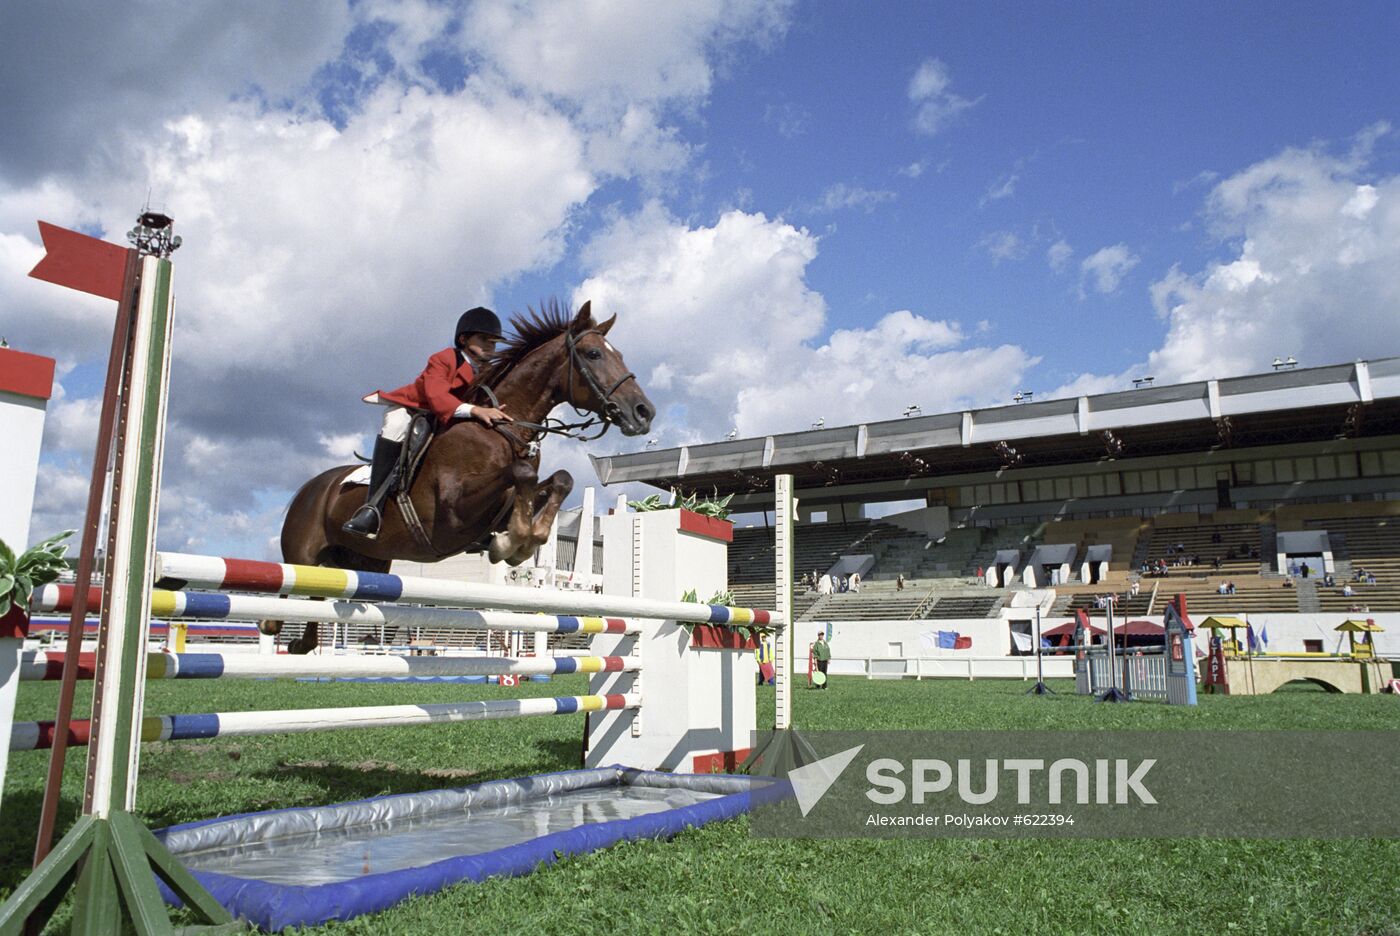 Russian children's show jumping competition